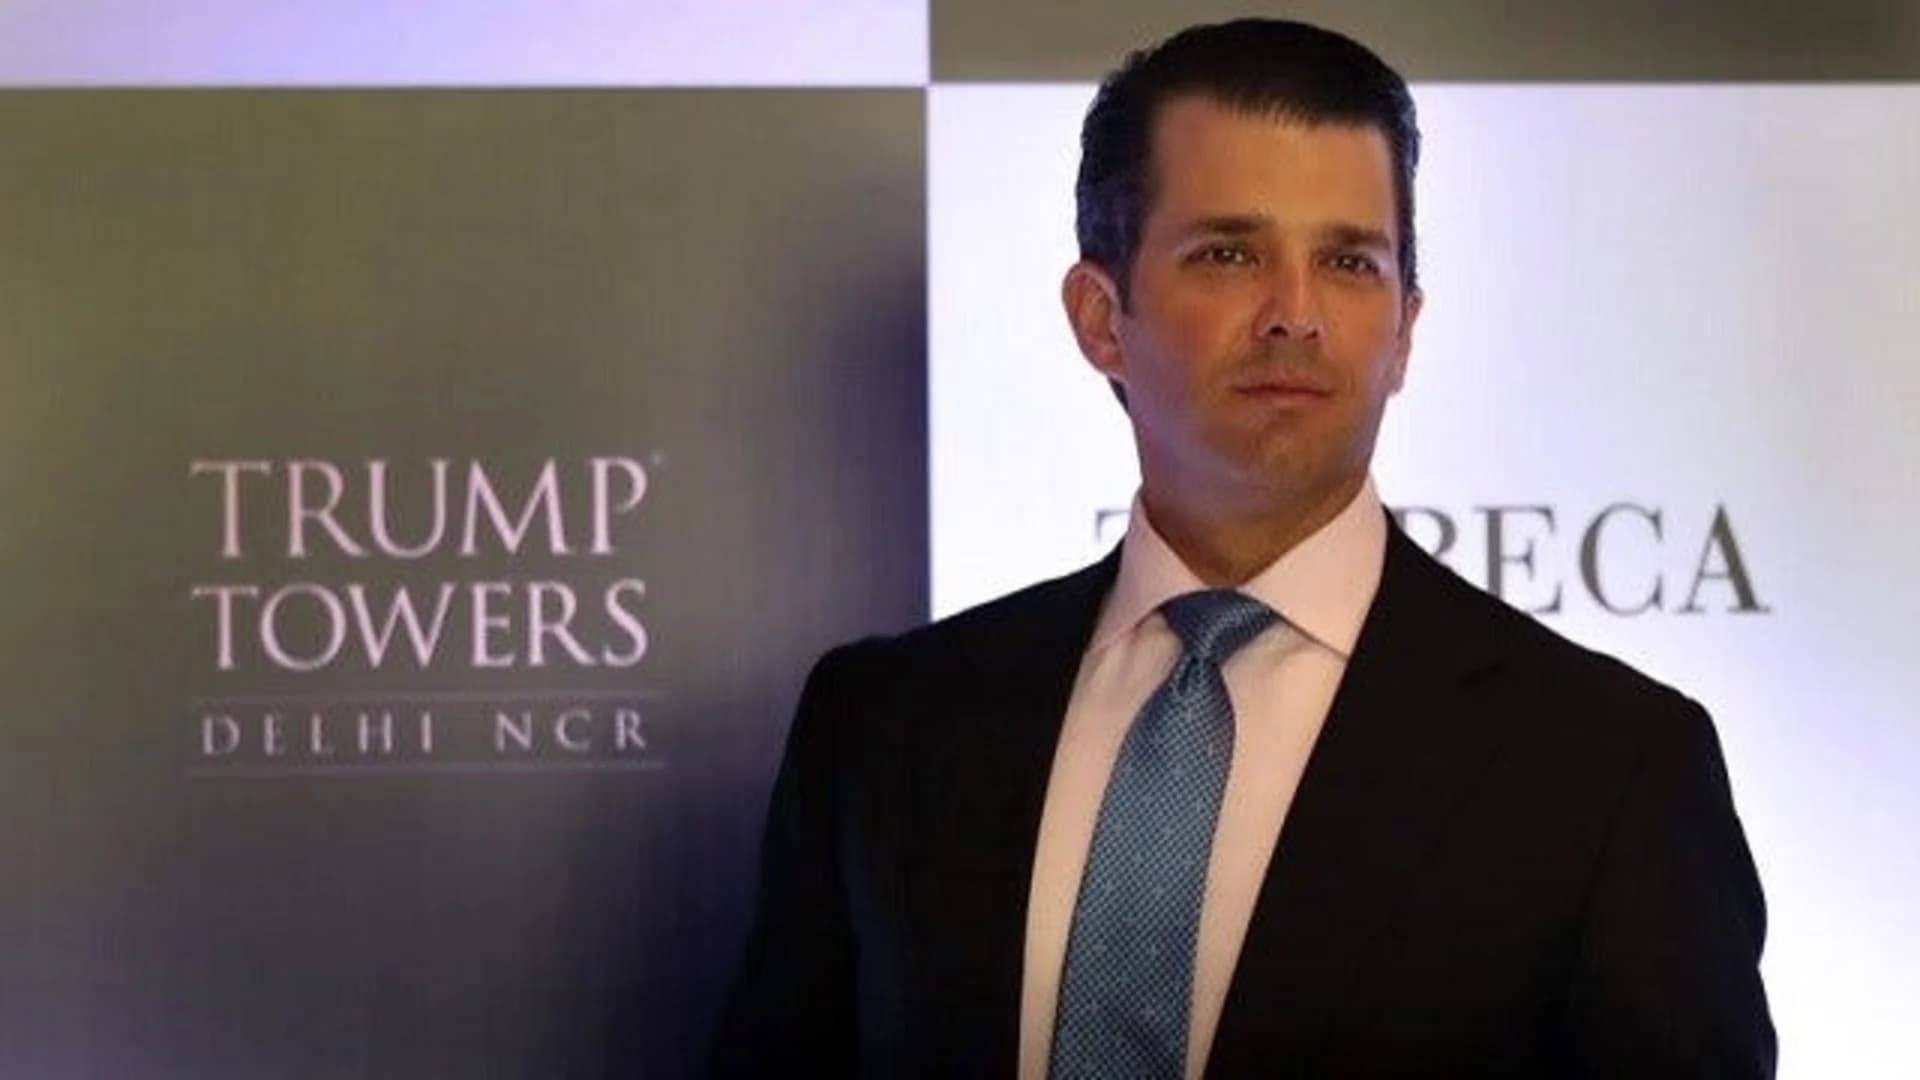 Trump Jr: 'Nonsense' that family's profiting from presidency